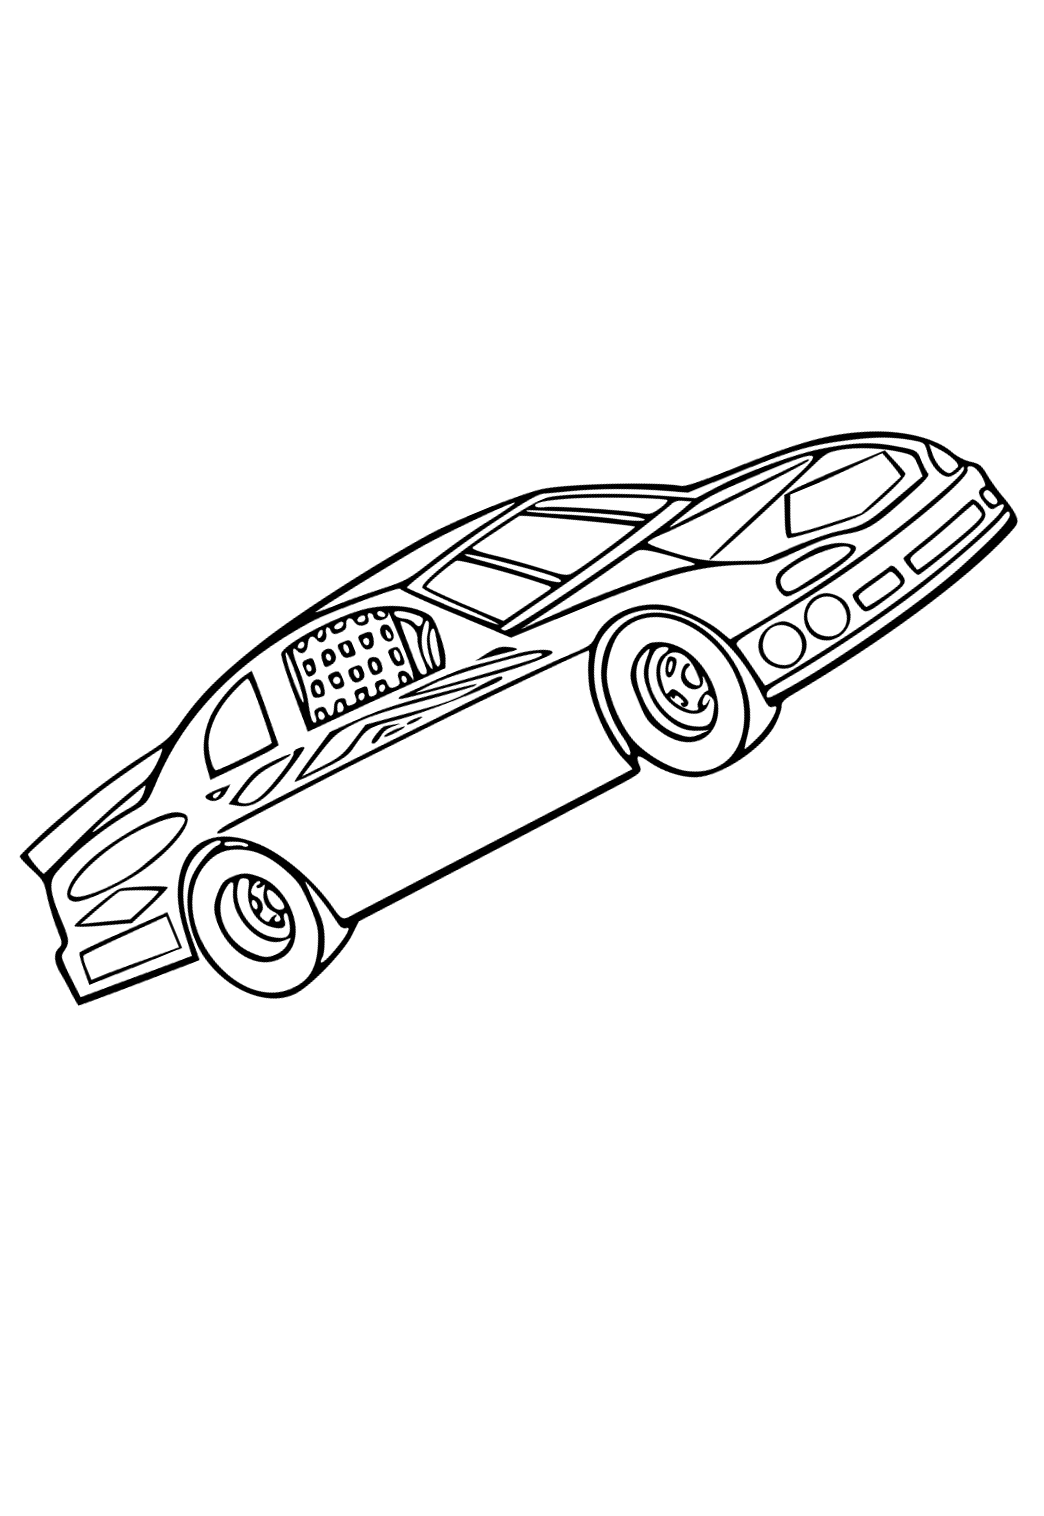 Free printable nascar car coloring page for adults and kids